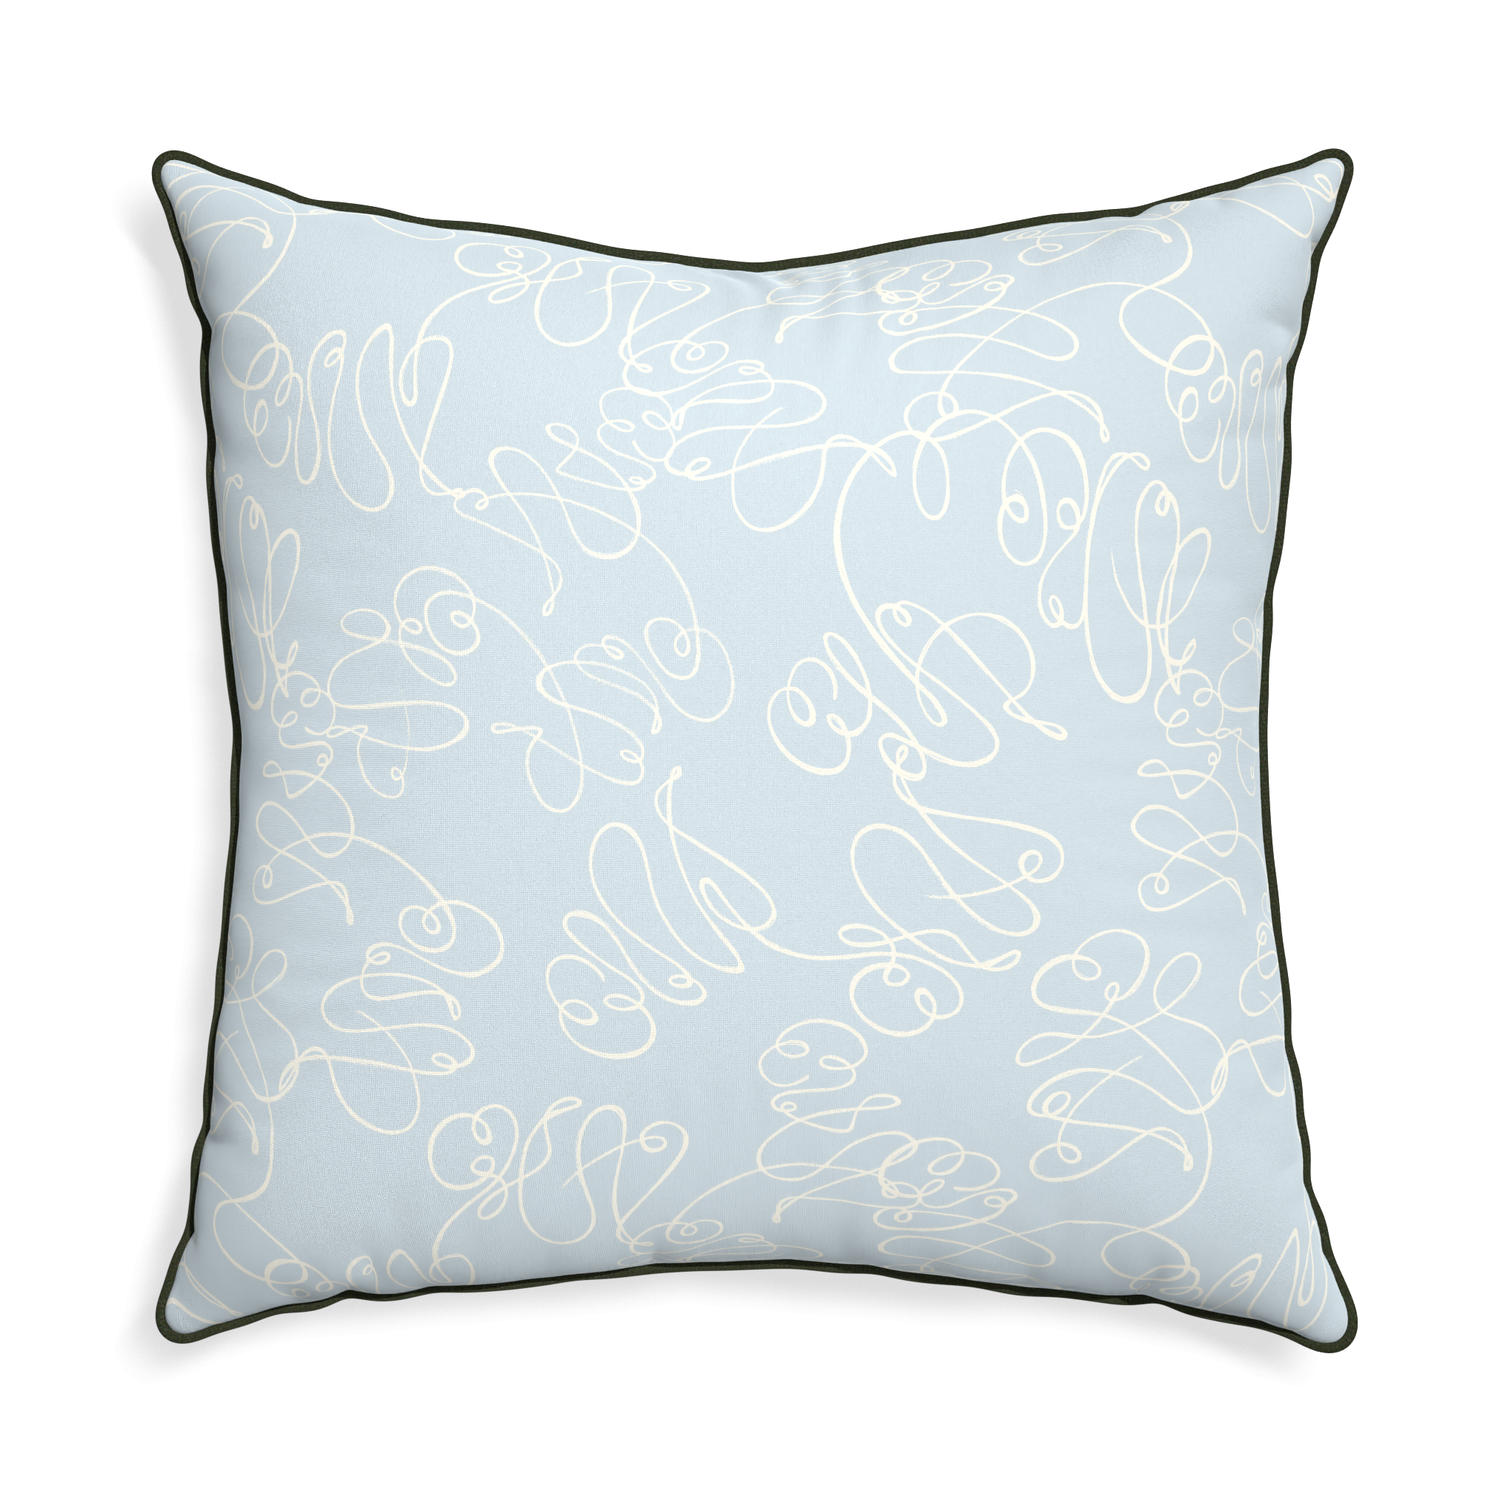 Euro-sham mirabella custom powder blue abstractpillow with f piping on white background